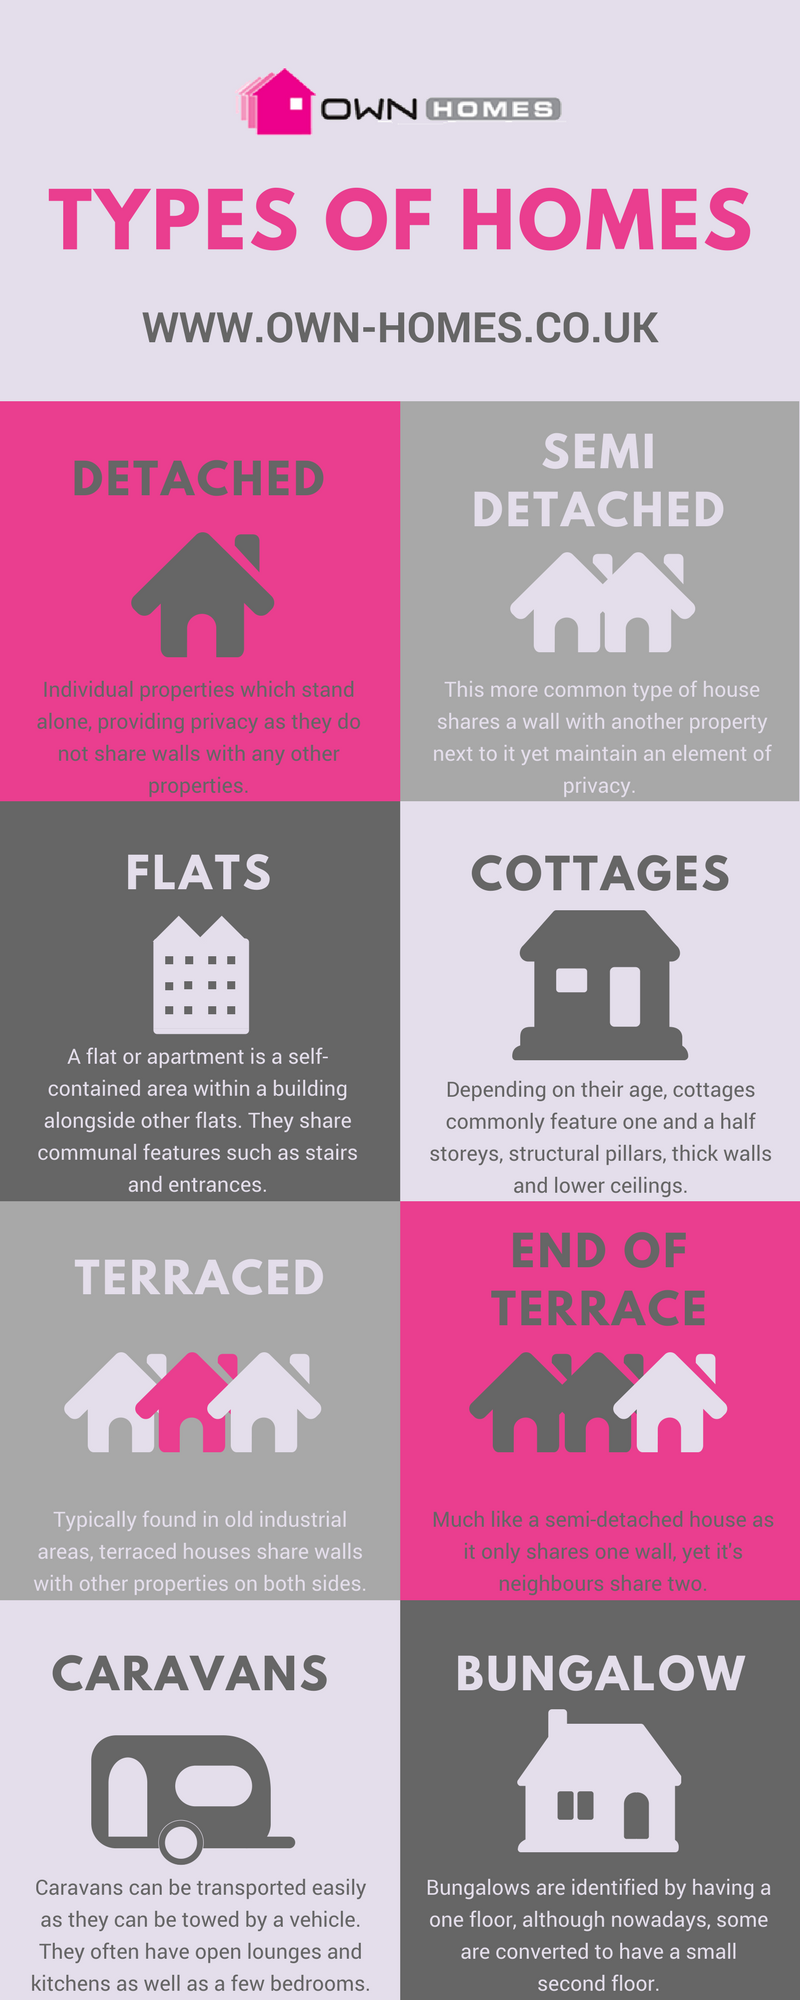 types-of-homes-infographic-galleryr